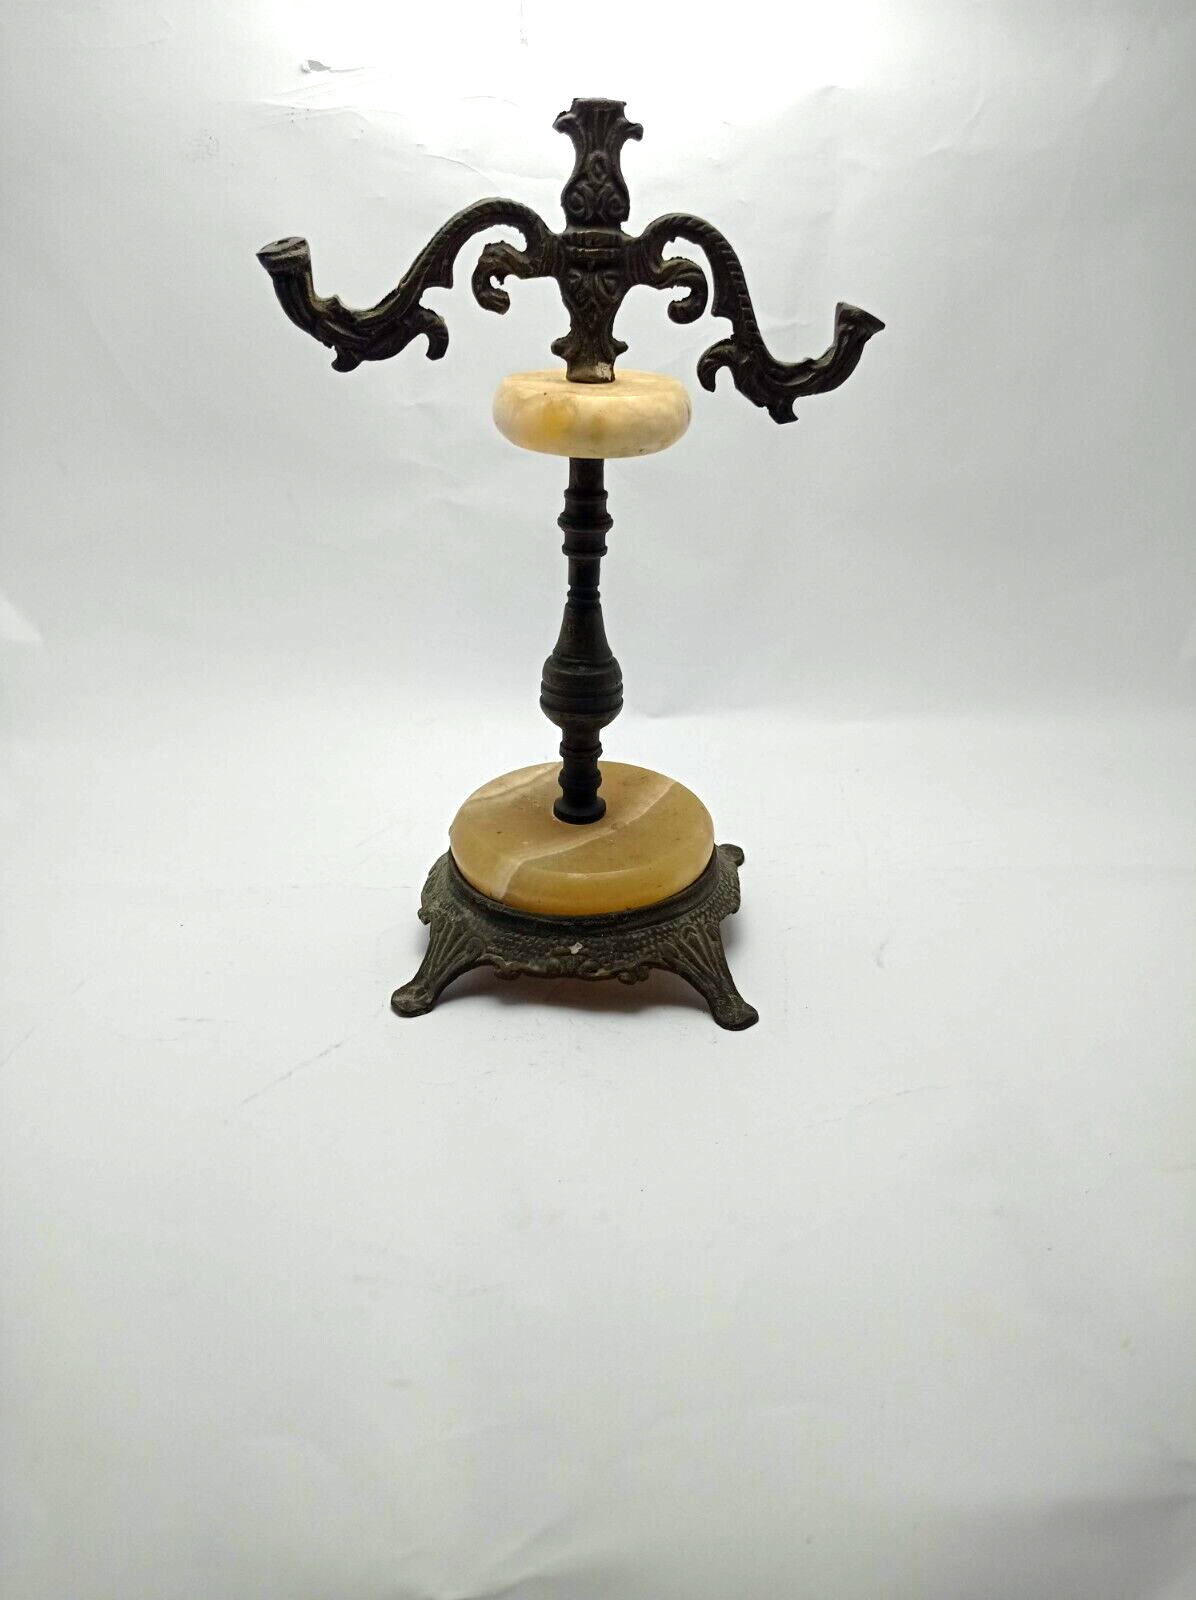 Antique Brass Candlestick Vintage With Marble Solid Decor Holders Style Elegant